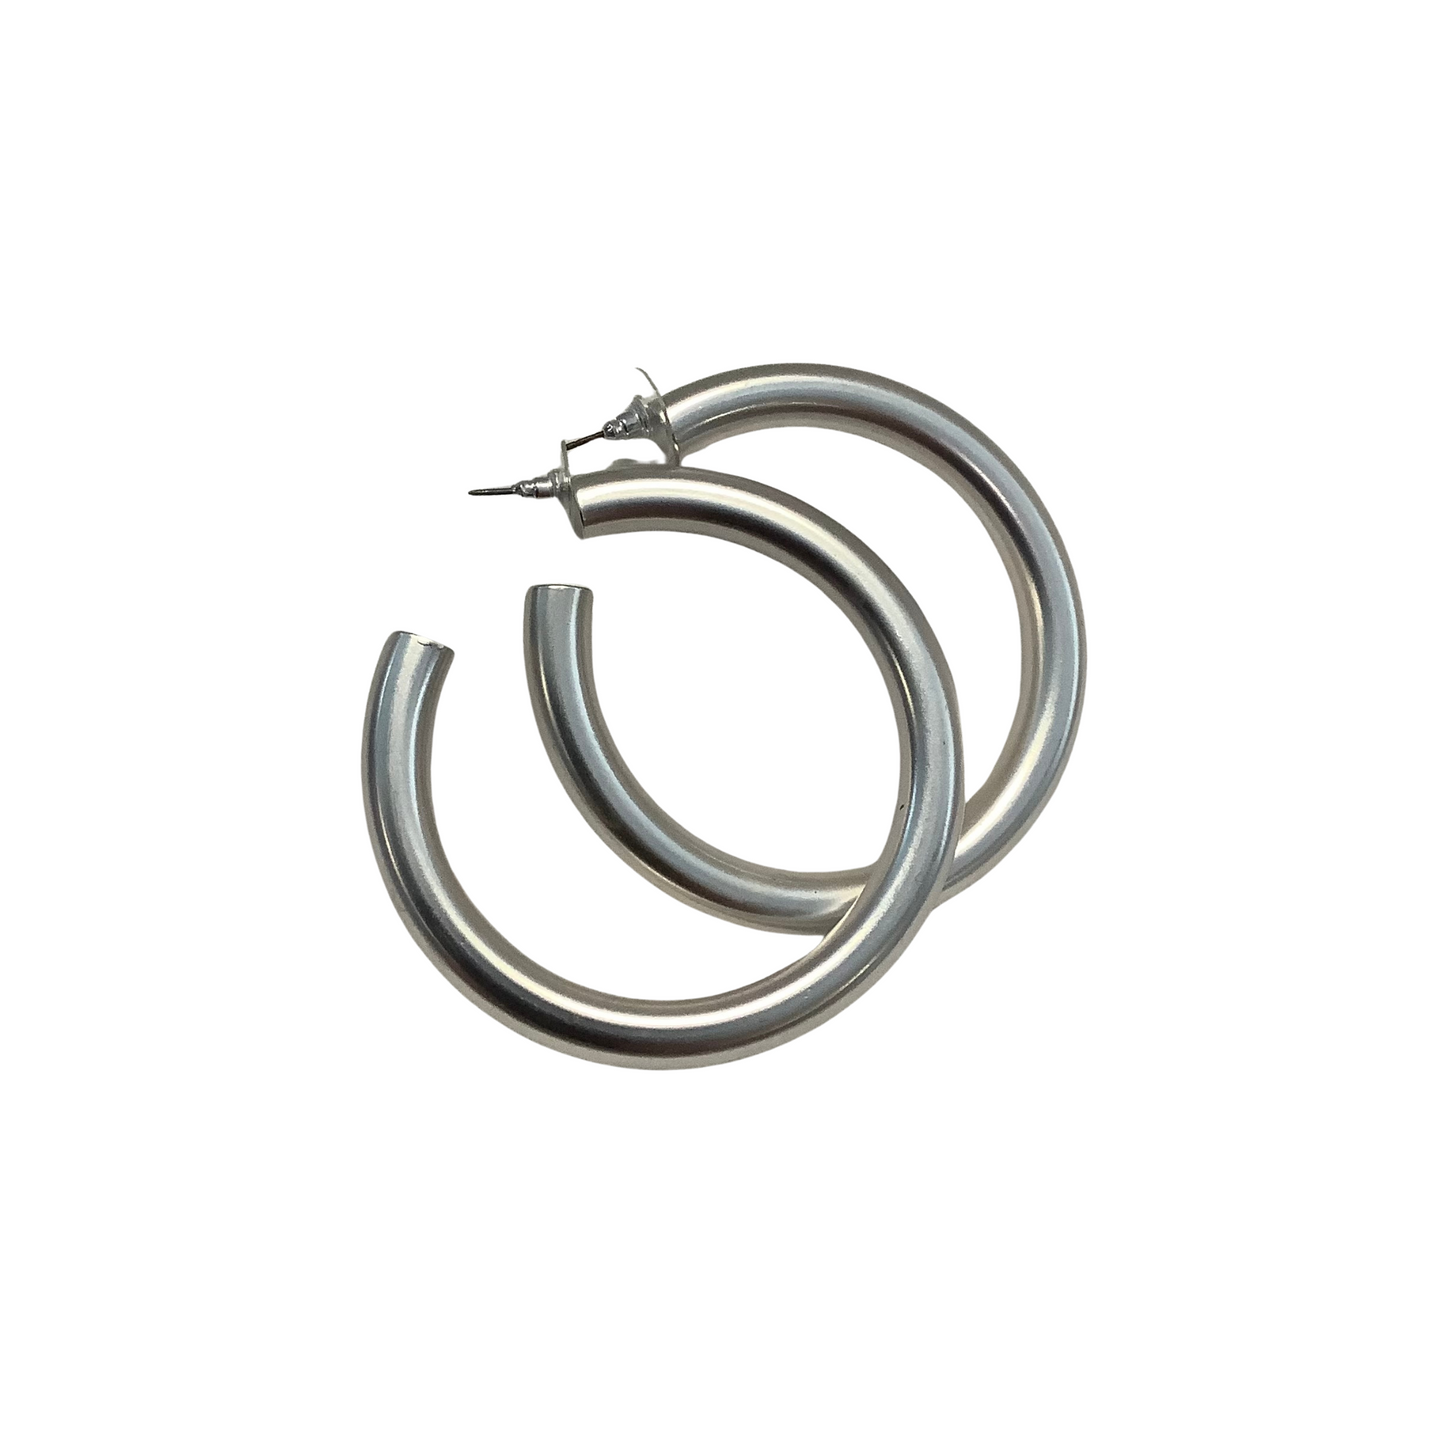 These Large Thick Hoop Earrings are the perfect accessory to add a touch of style to your look. Available in both gold and silver colors, they are sure to suit any outfit. Perfect for special occasions or everyday wear, their fine craftsmanship is sure to make a statement.